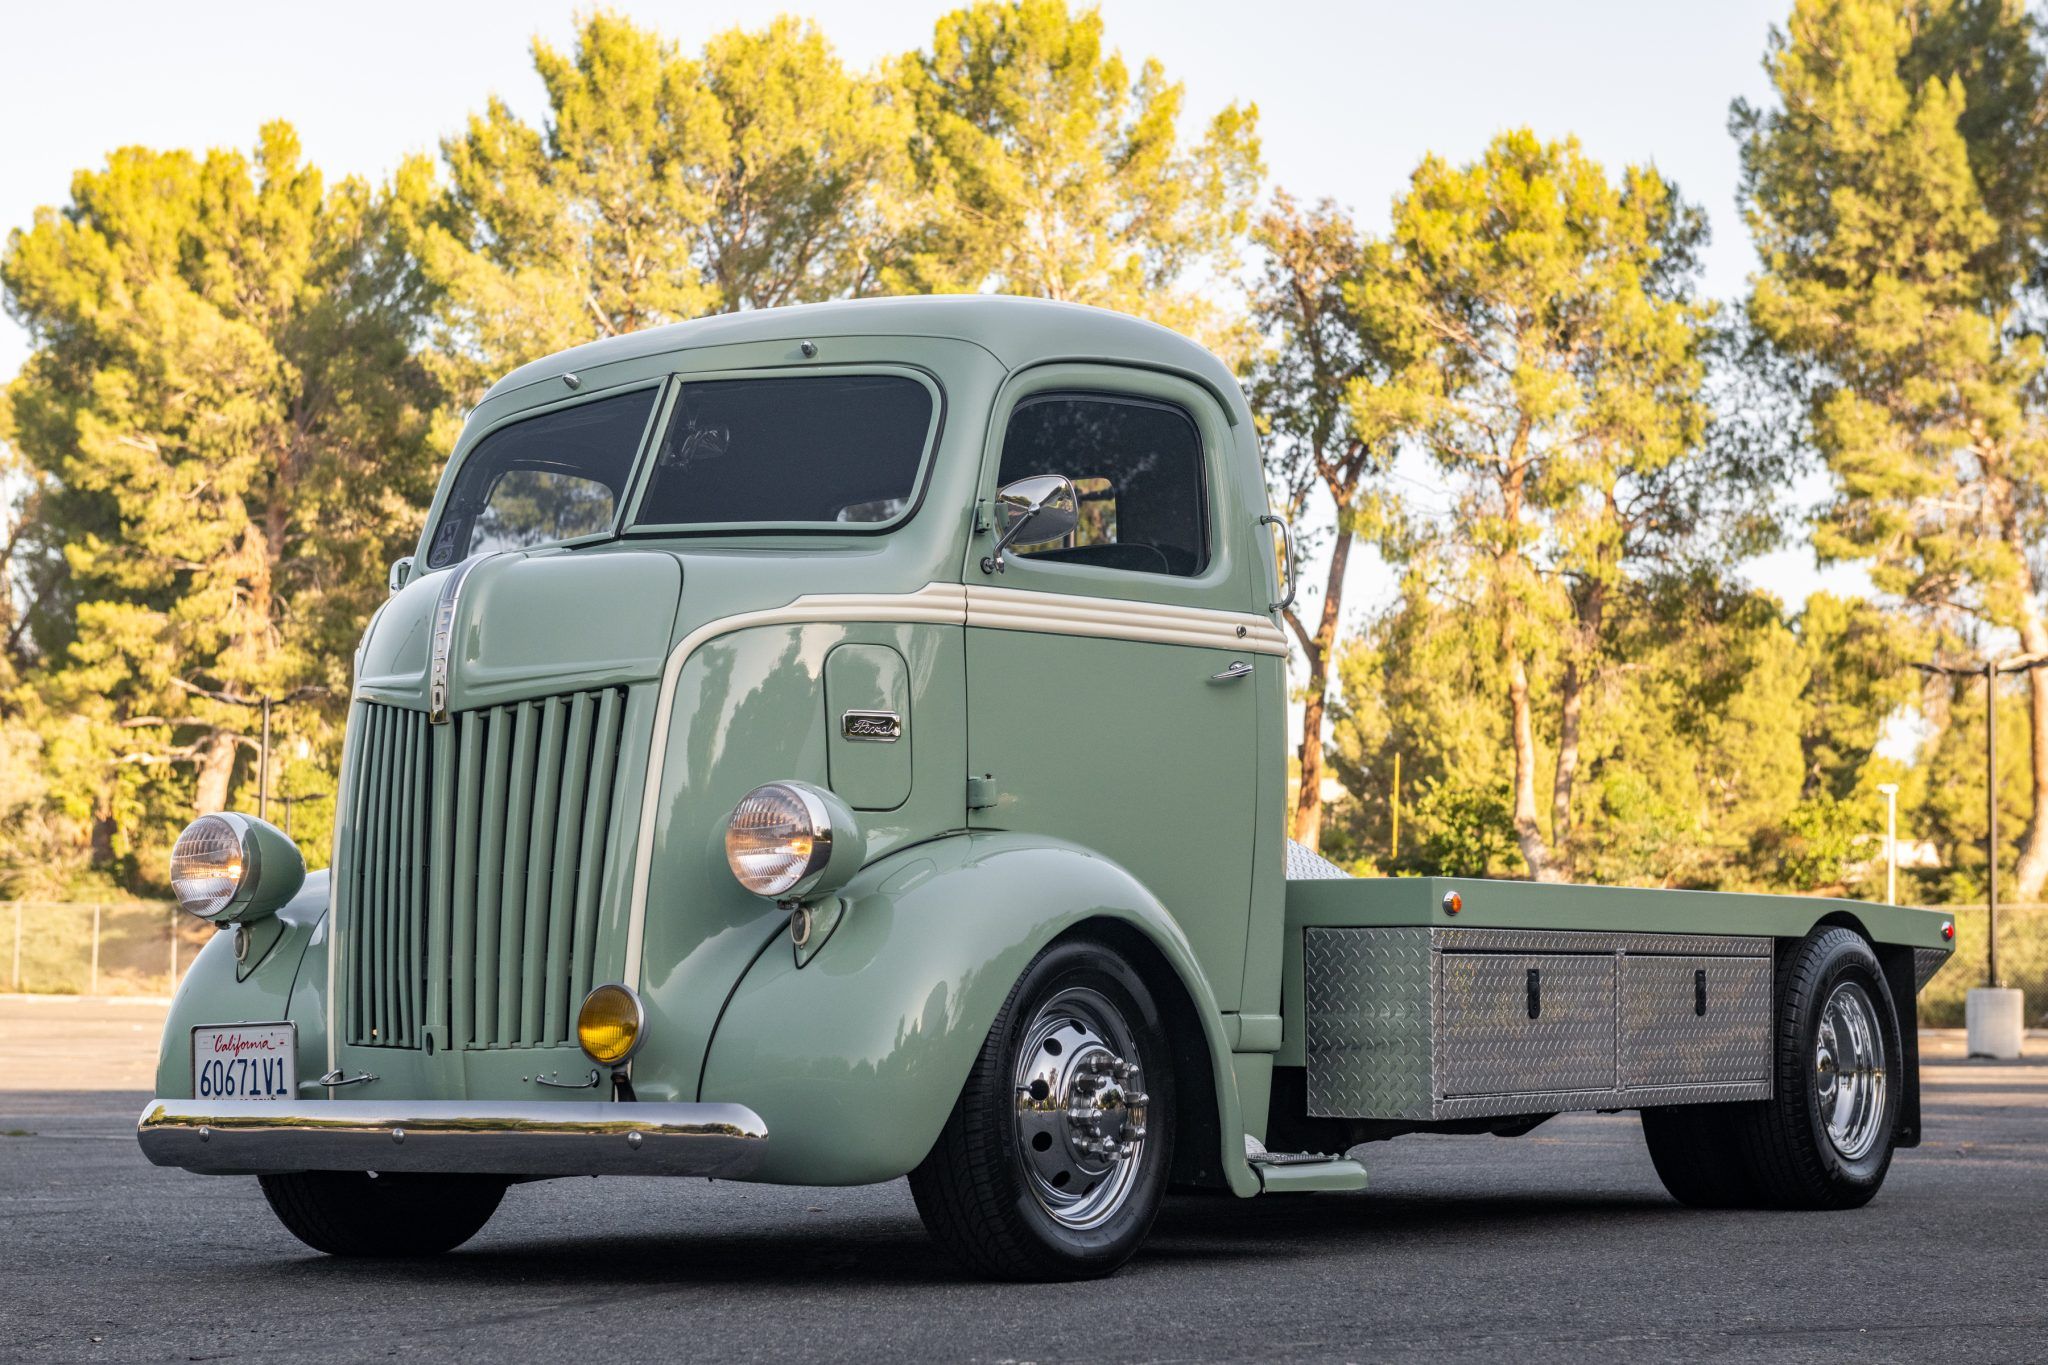 1941 Ford COE Truck Is Our Bring a Trailer Auction Pick